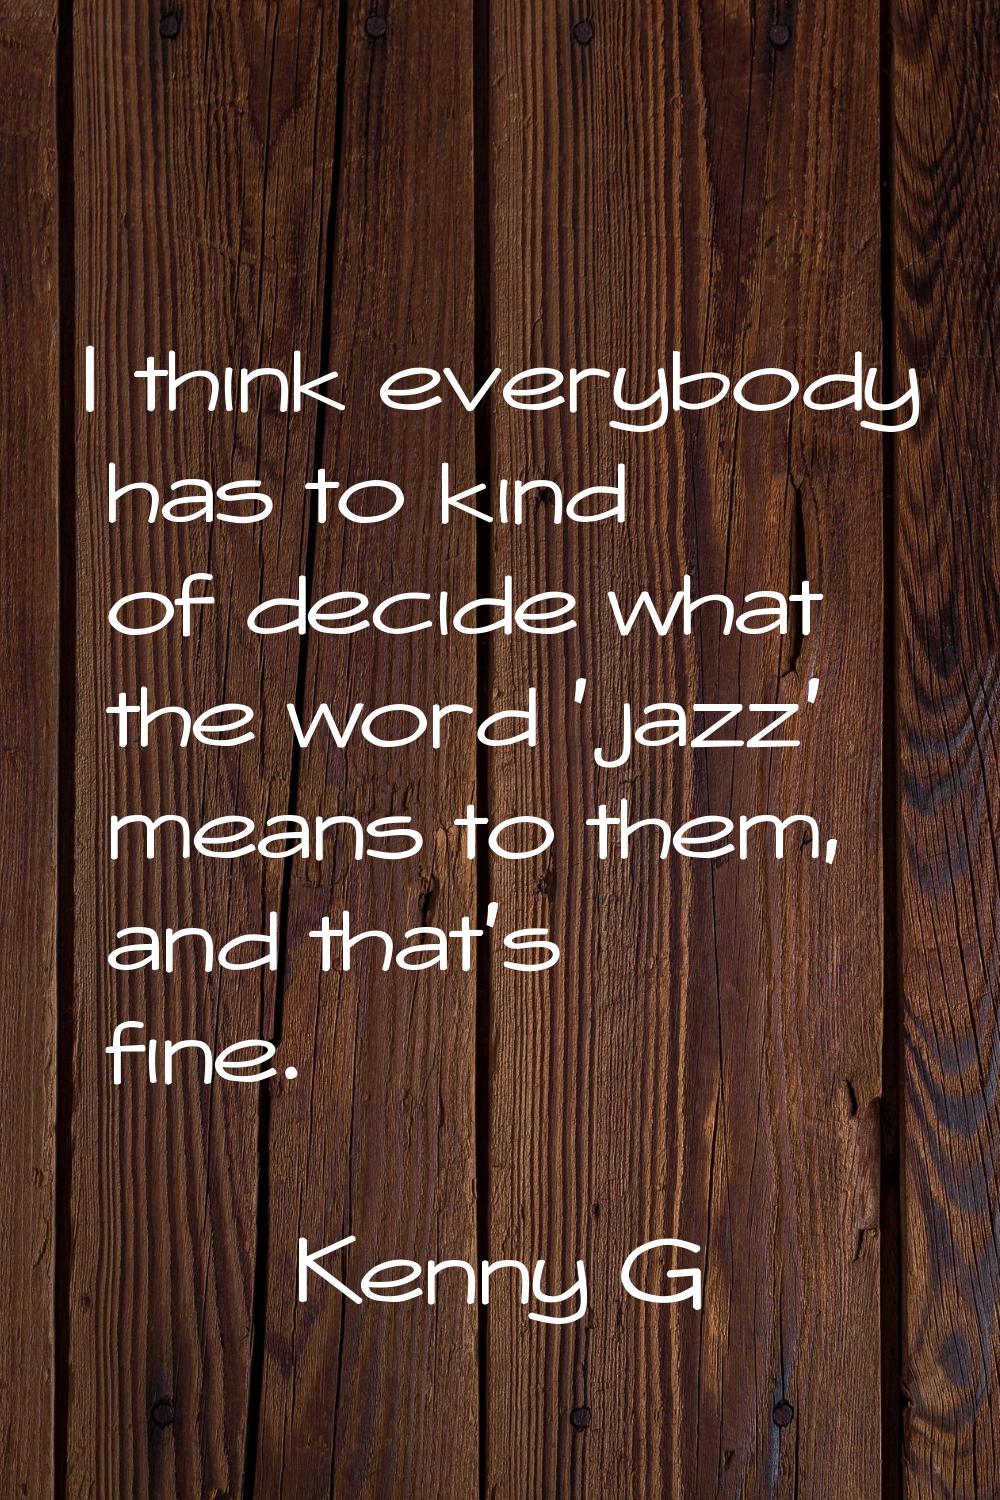 I think everybody has to kind of decide what the word 'jazz' means to them, and that's fine.